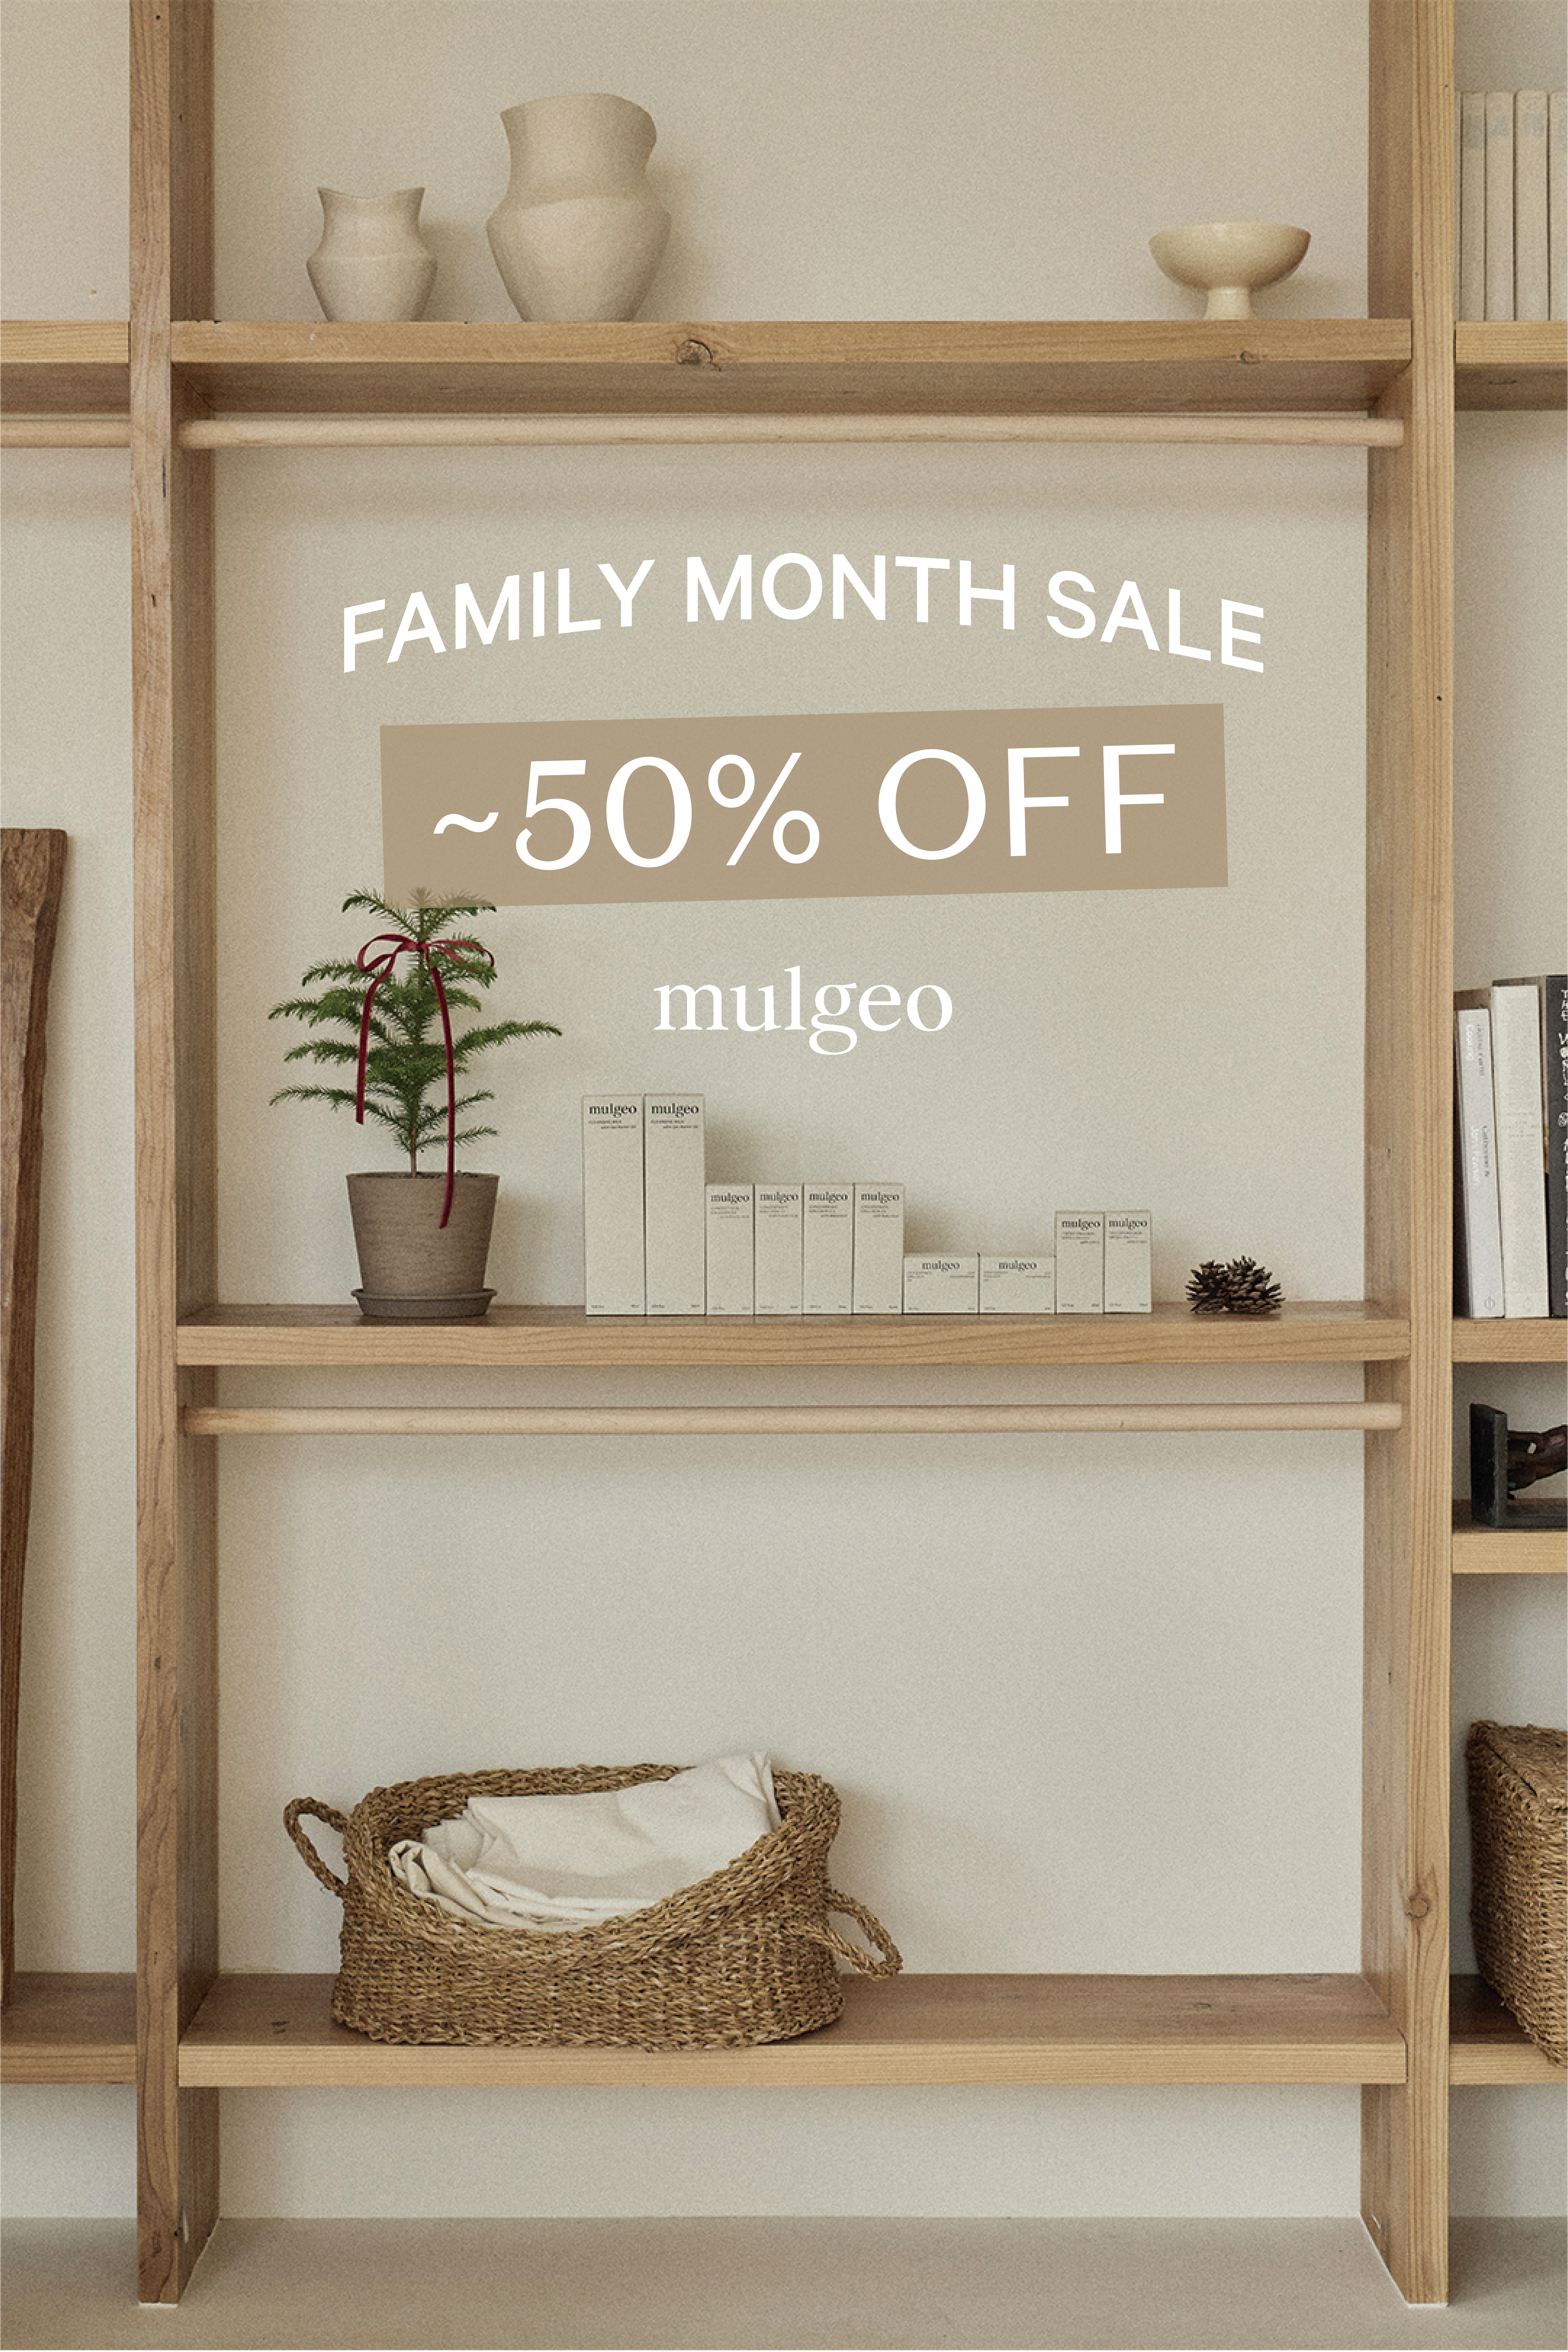 1714551949.3278family month sale_1080x1920.png